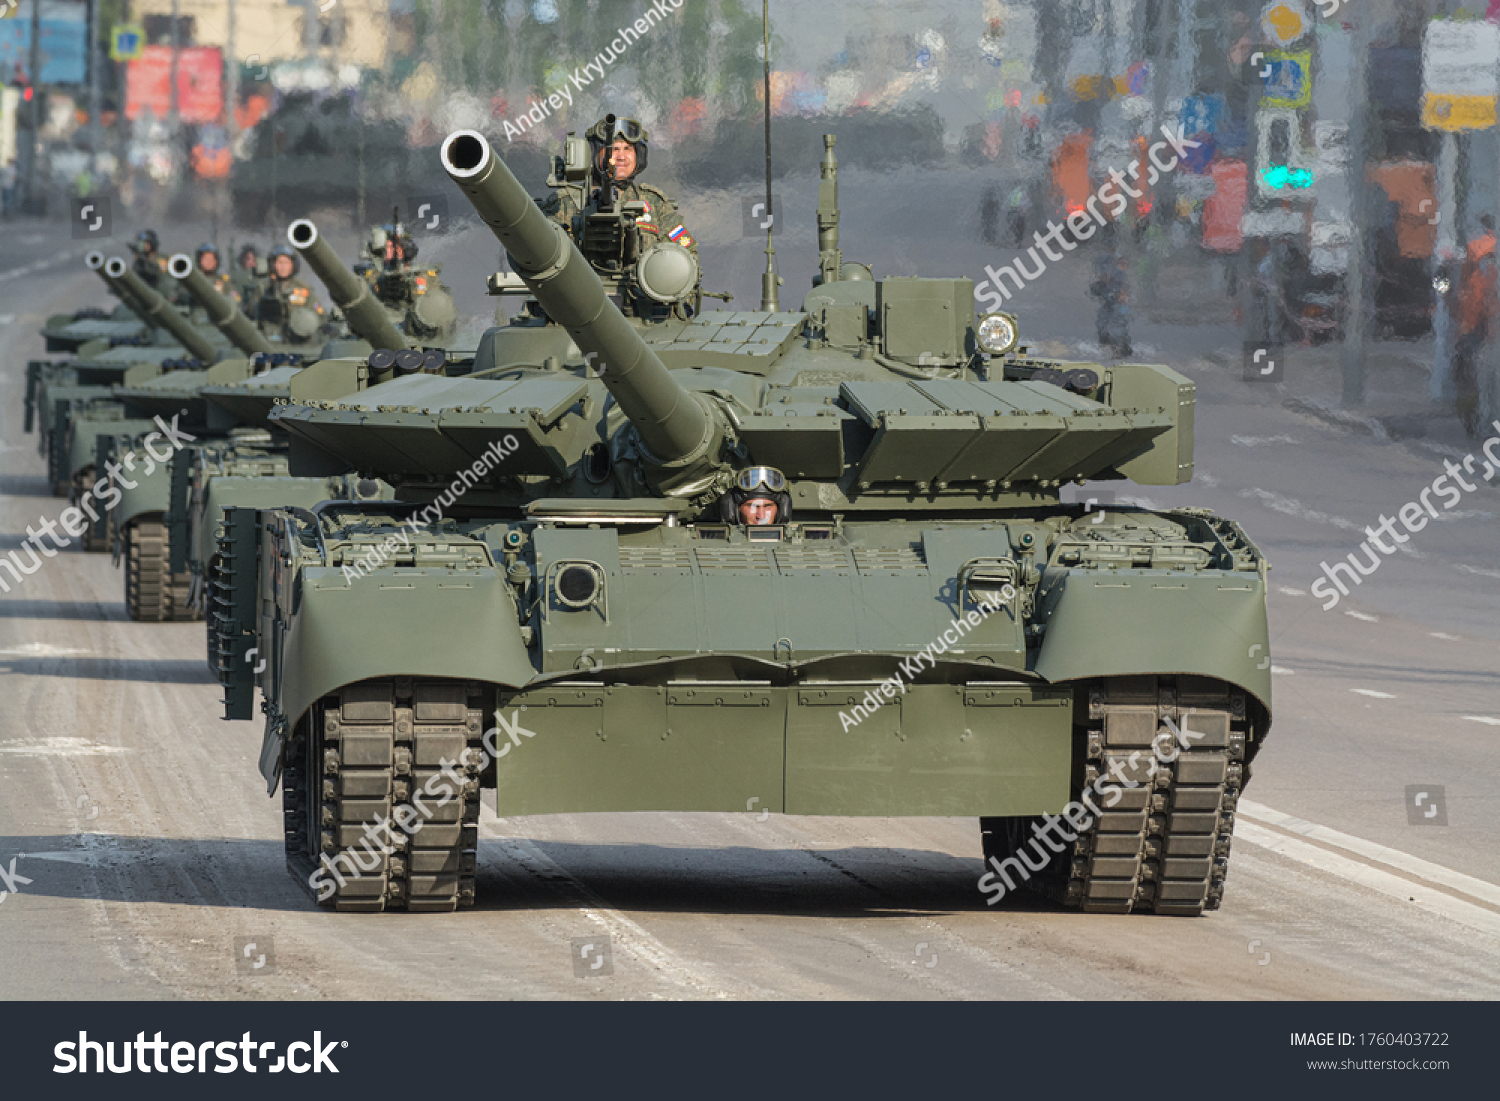 https://image.shutterstock.com/z/stock-photo-june-moscow-russia-the-t-bvm-tank-goes-to-red-square-to-participate-in-the-rehearsal-1760403722.jpg